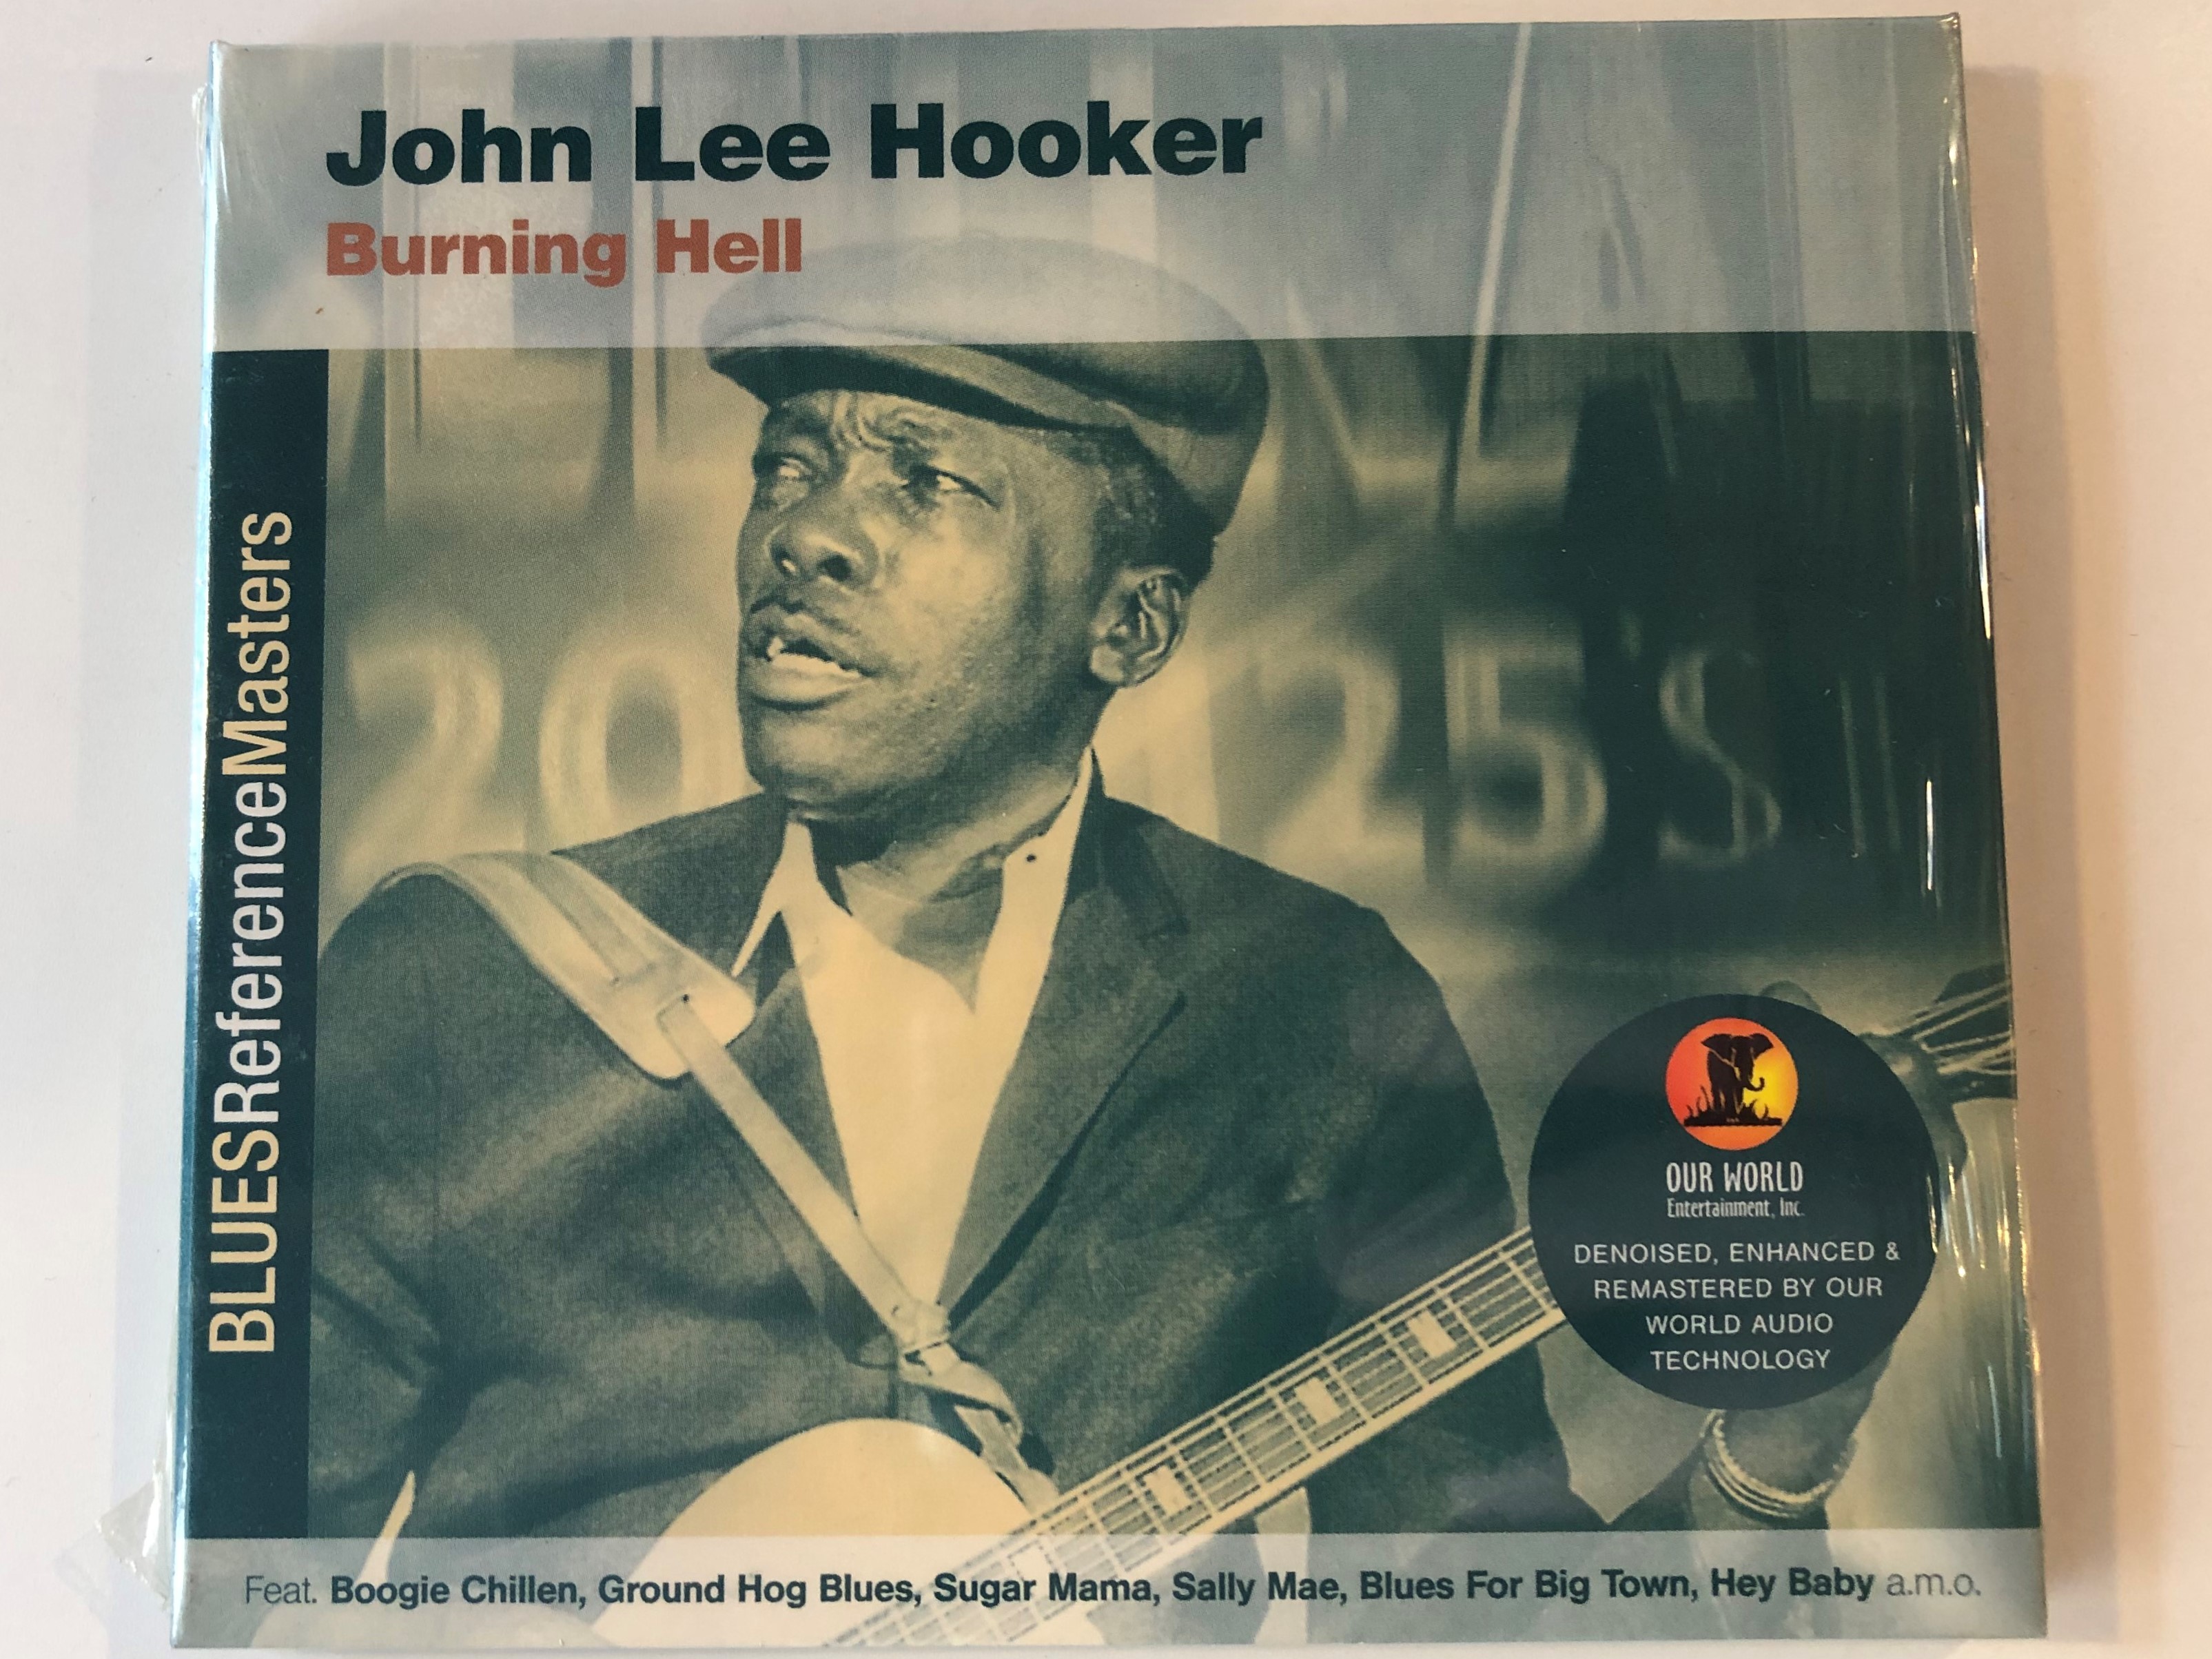 john-lee-hooker-burning-hell-blues-reference-masters-feat.-boogie-chillen-ground-hog-blues-sugar-mama-sally-mae-blues-for-big-town-hey-baby-a.-m.-o.-our-world-entertainment-audio-cd-2-1-.jpg